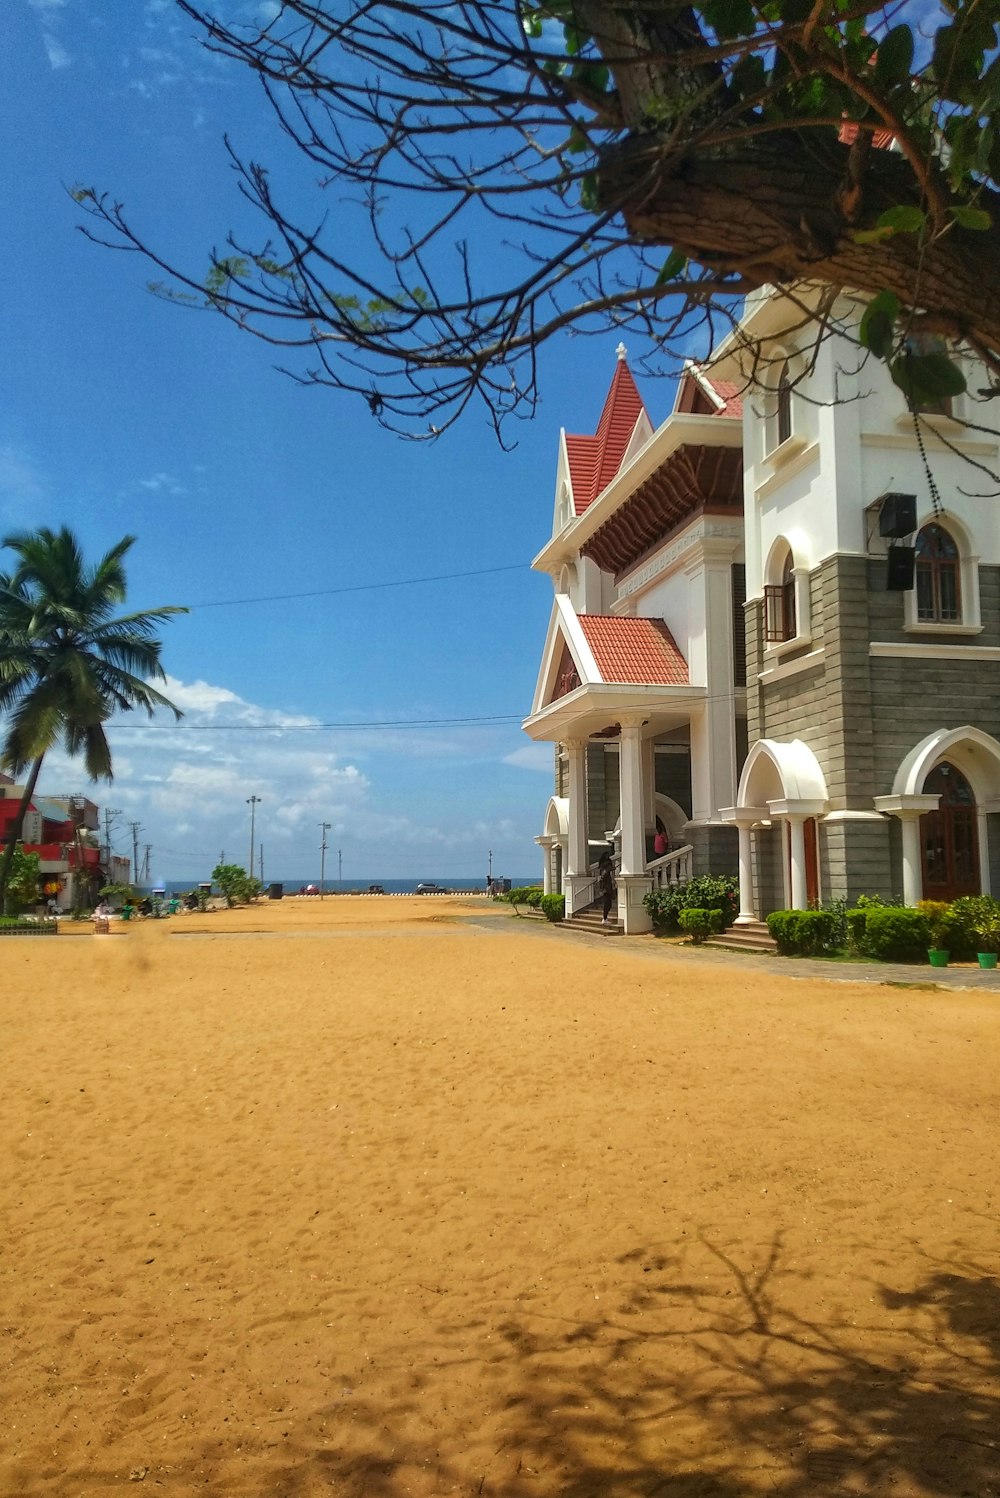 a large white house sitting on top of a sandy beach